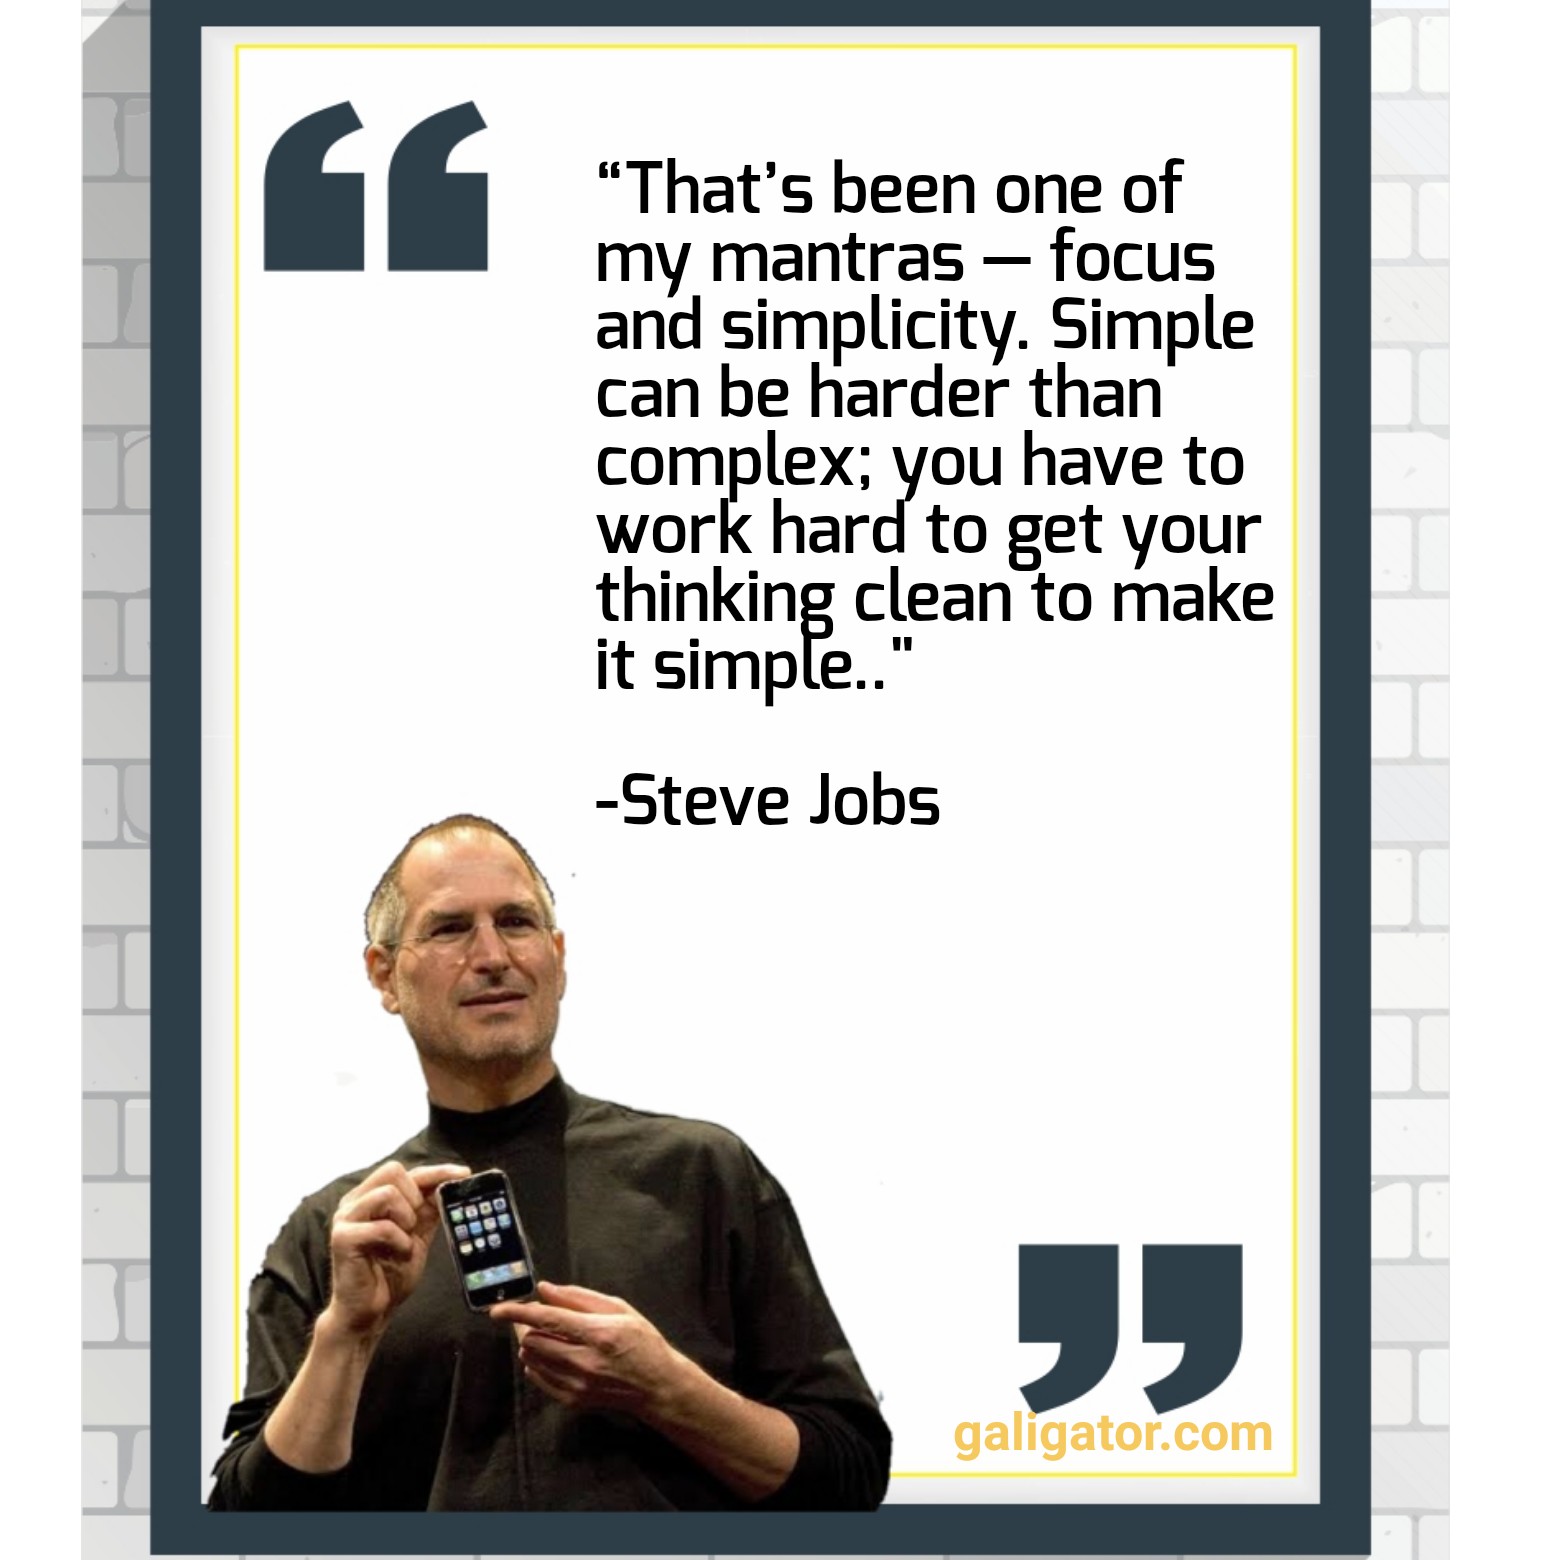 iphone quotes , self motivation motivation iphone wallpaper quotes , iphone wallpaper quotes,marketing quotes steve jobs,steve jobs quotes in english ,leadership steve jobs quotes ,steve jobs quote overnight success,teamwork steve jobs quotes on leadership ,steve jobs dogma quote ,steve jobs innovation quote,steve jobs death quote,steve jobs simplicity quote,steve jobs quotes your time is limited ,20 most inspirational quotes by steve jobs ,steve jobs quote great things in business ,famous leadership quotes steve jobs 